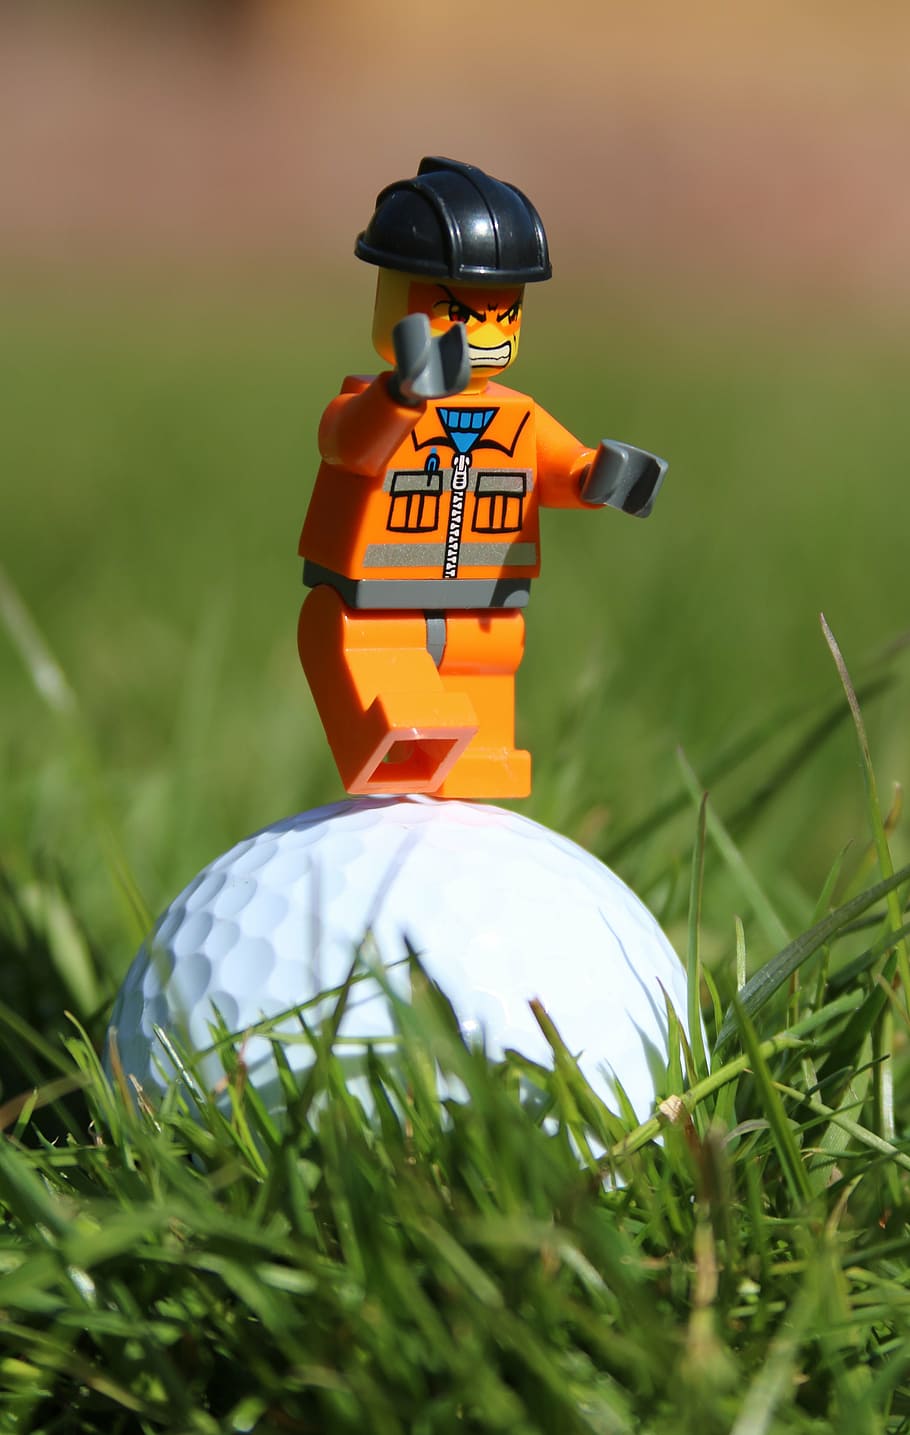 golf, golf ball, angry, funny, toy man, man, grass, face, expression, furious